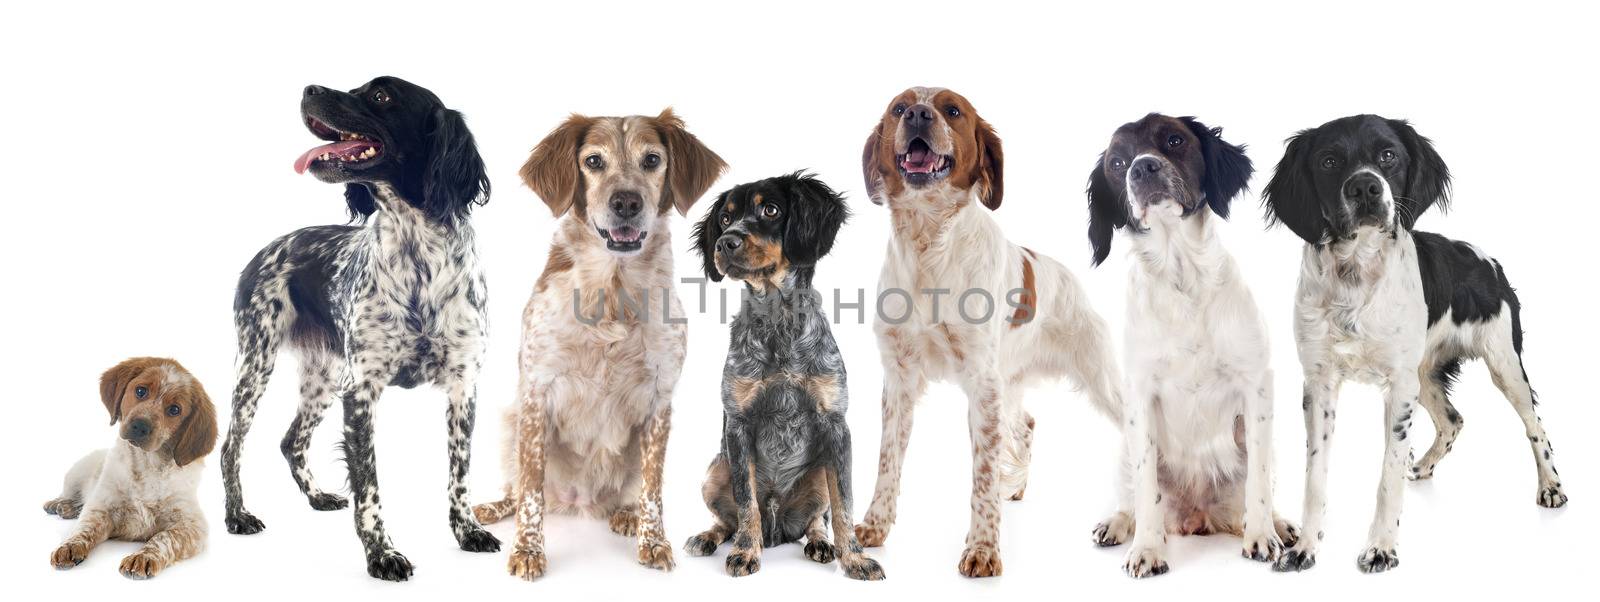 brittany dogs in front of white background